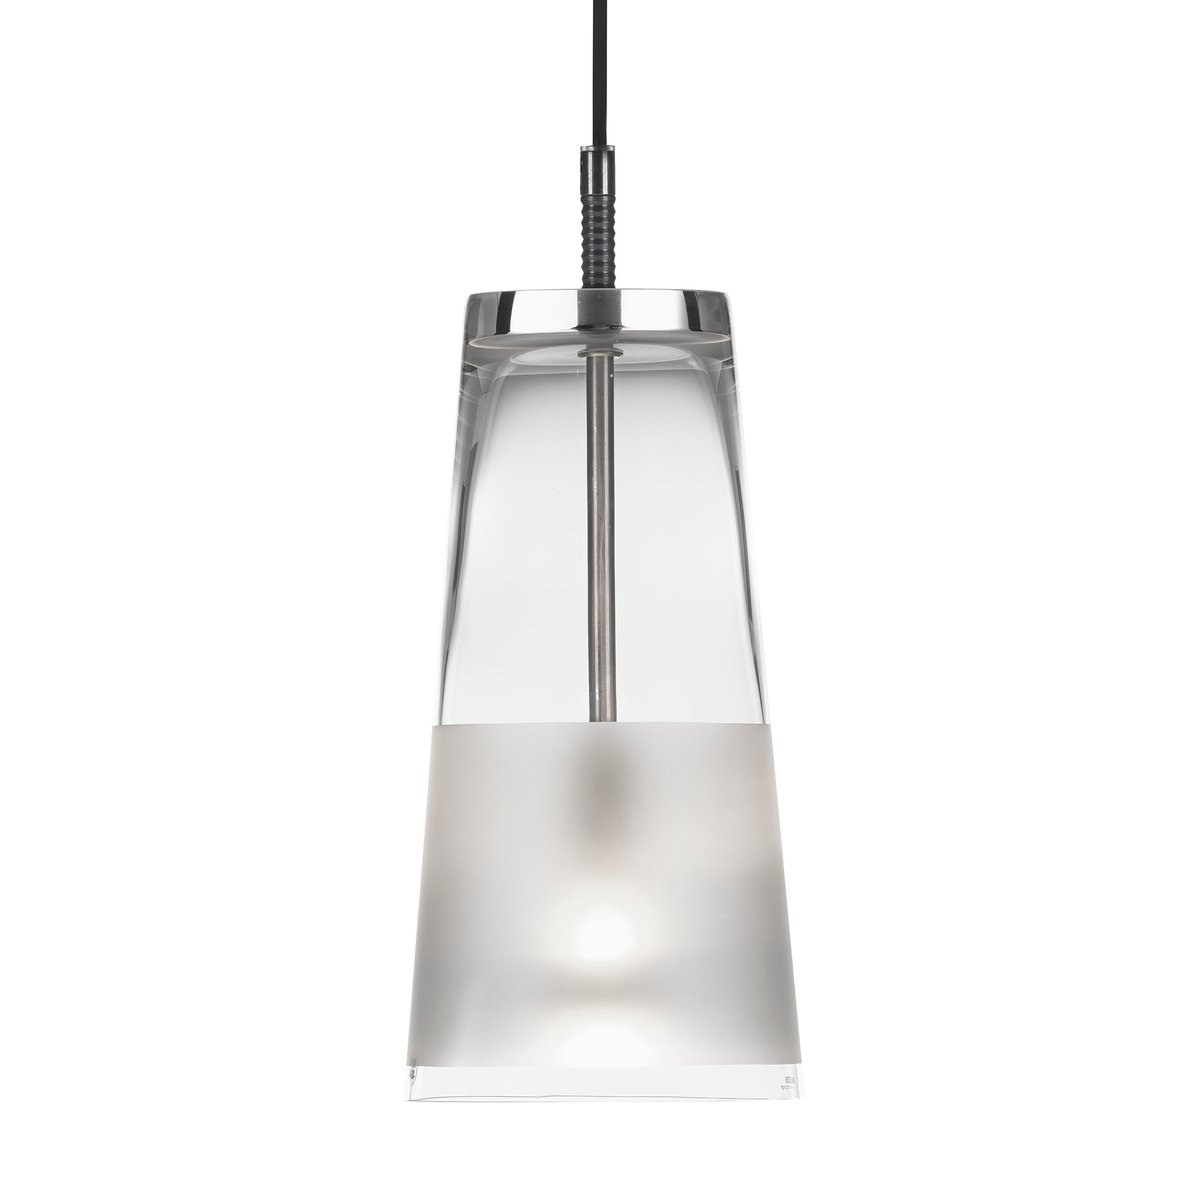 Bsweden Manhattan lamp frost band 29 cm froost band